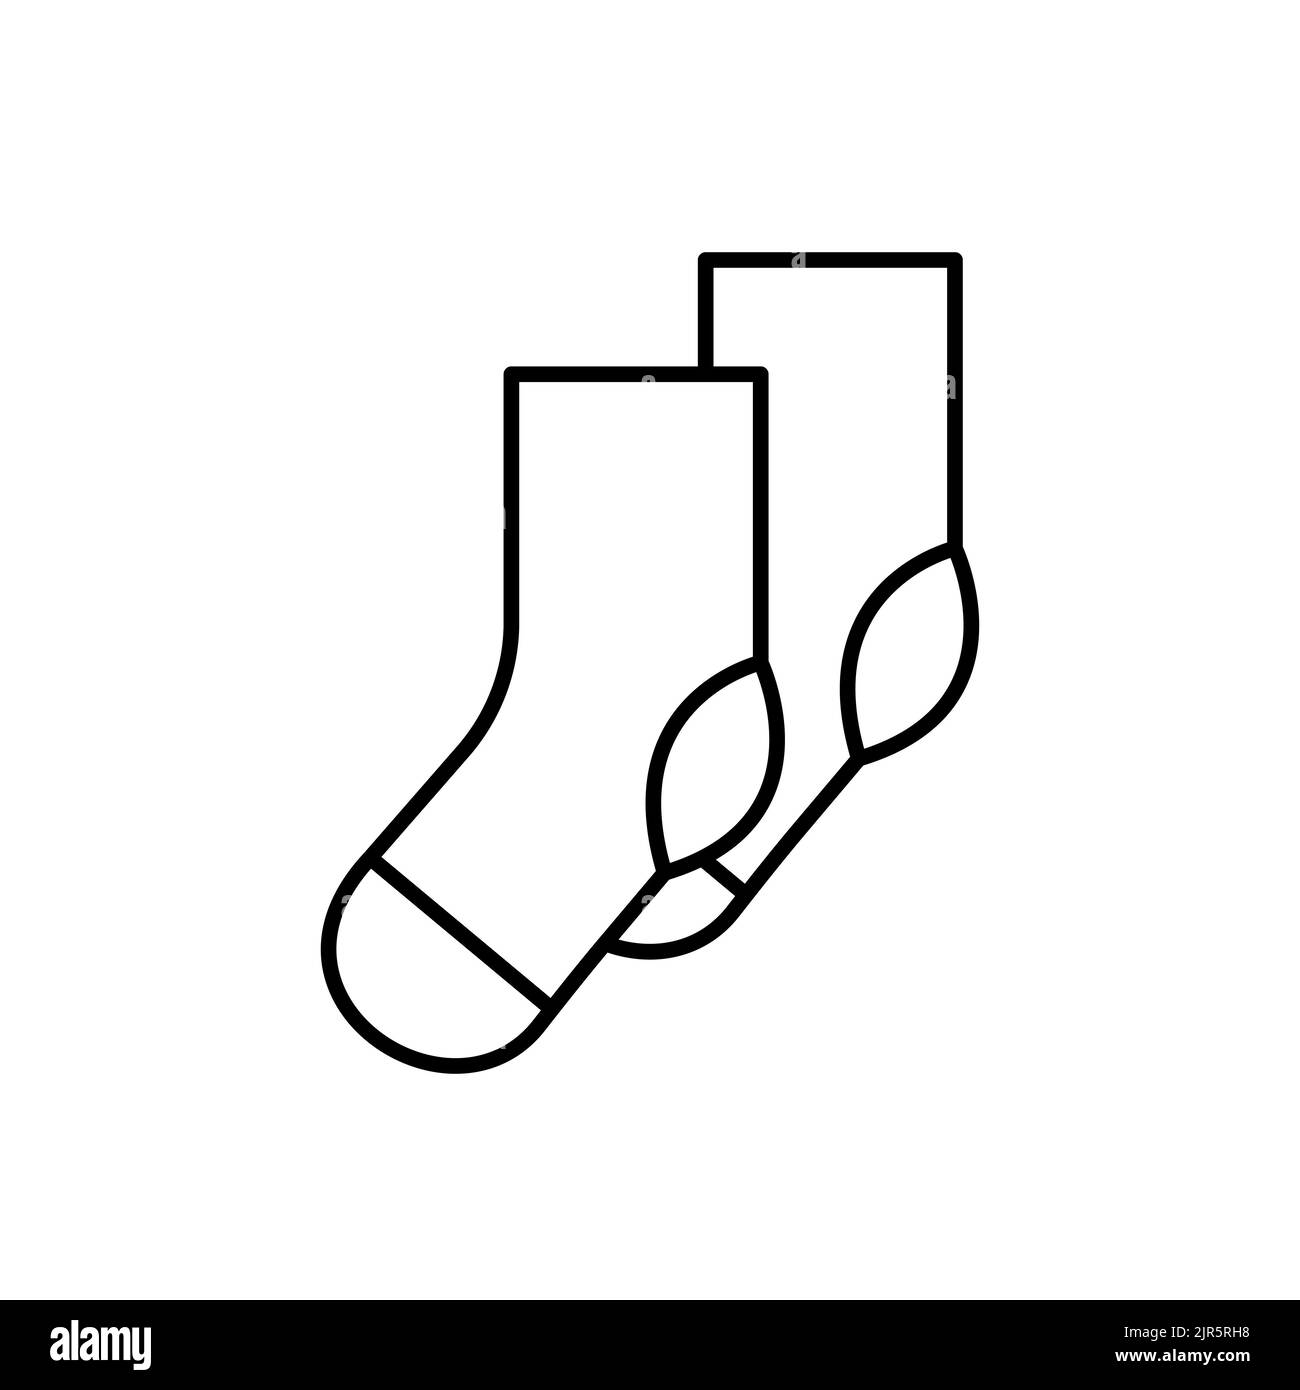 Elegant mens socks outline vector icon. EPS 10.... Cotton male product sign..... Stylish socks badge. Woolen clothin.... Warm, autumn clothes concept. Stock Photo